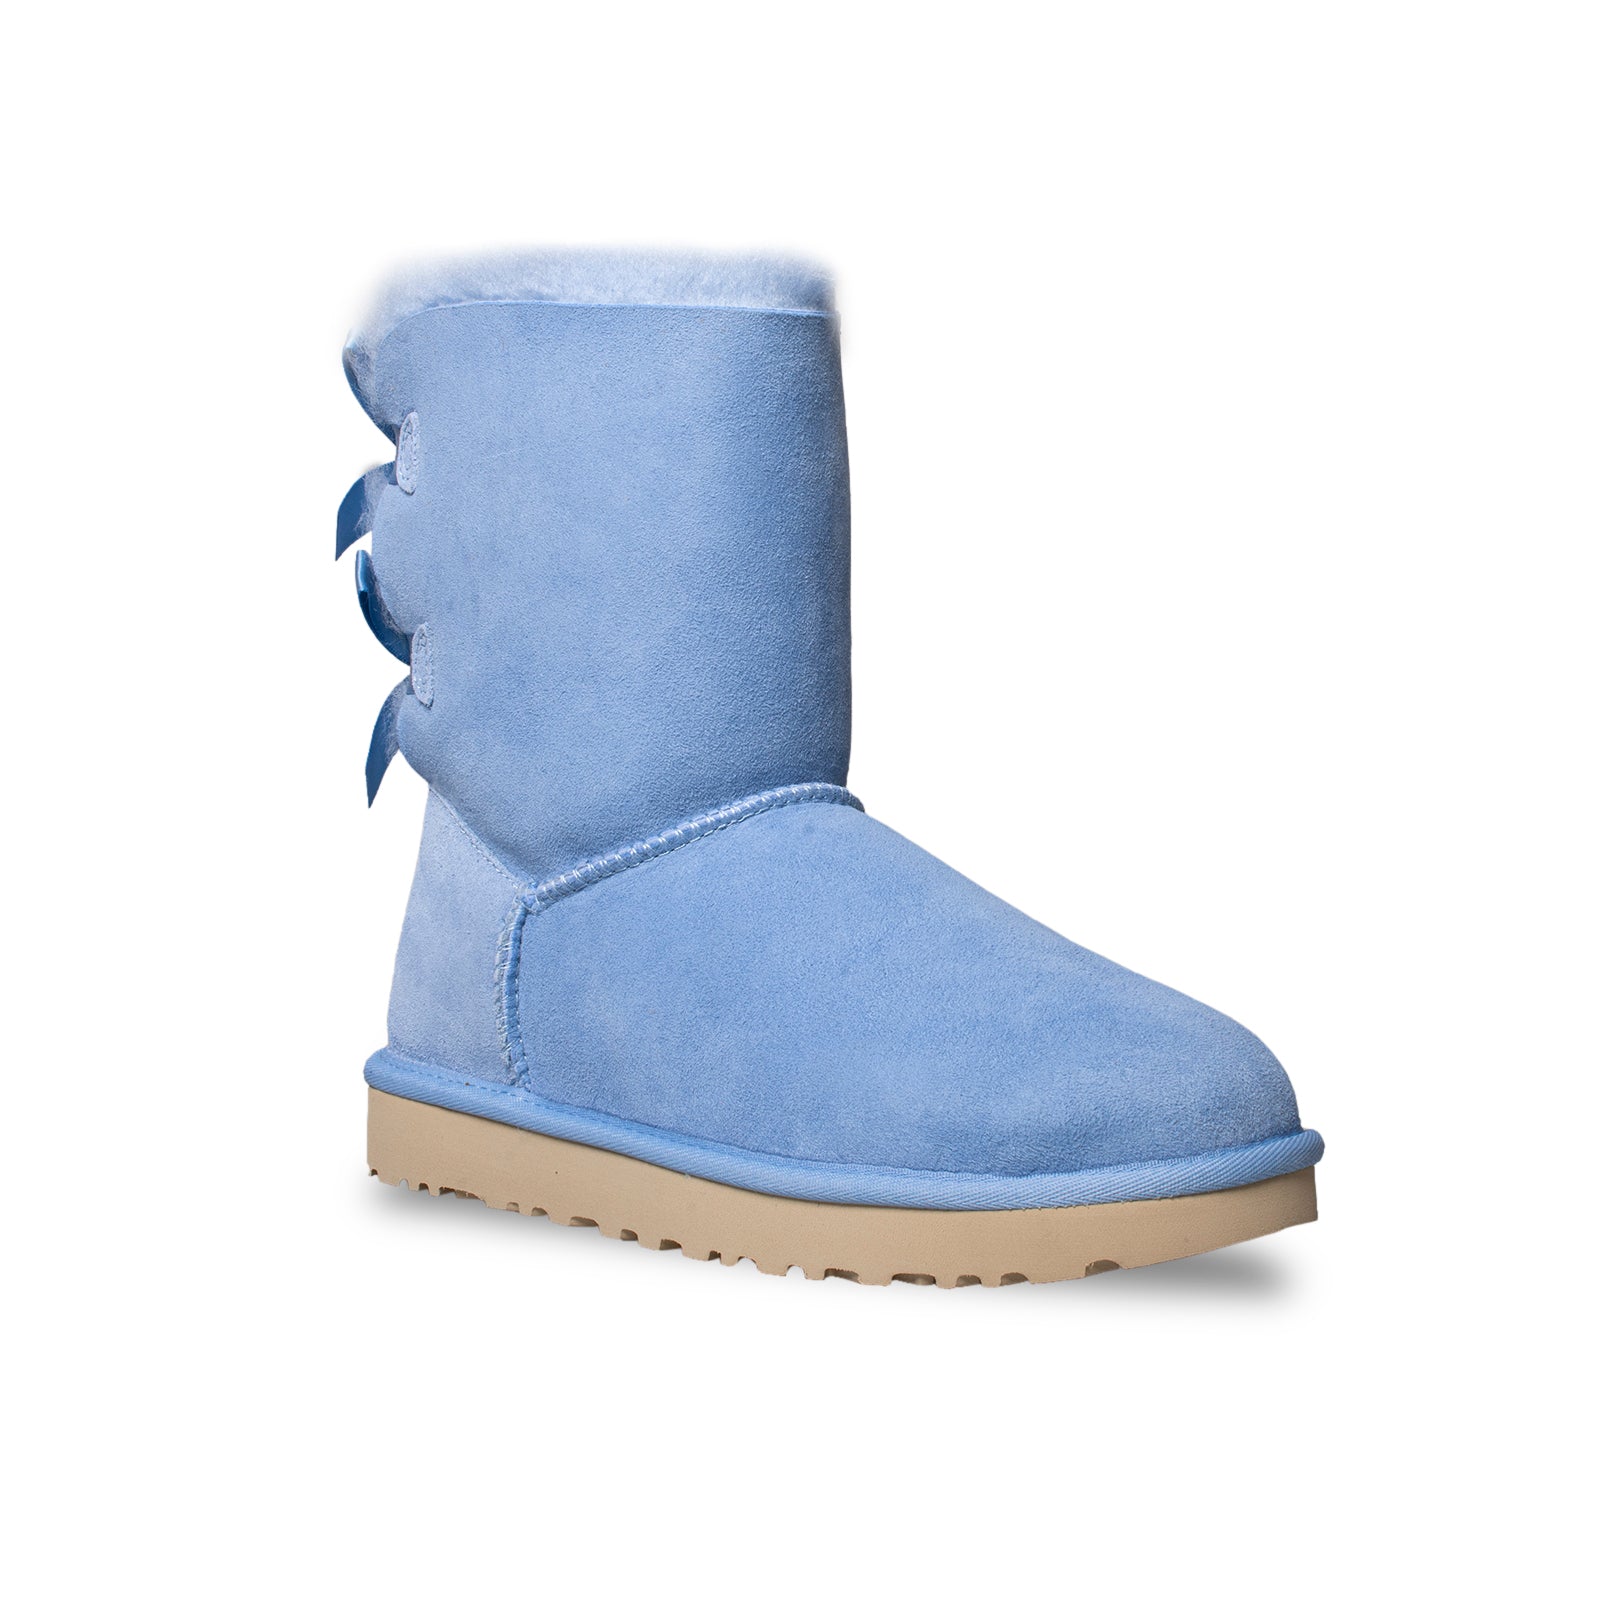 light blue uggs with bows